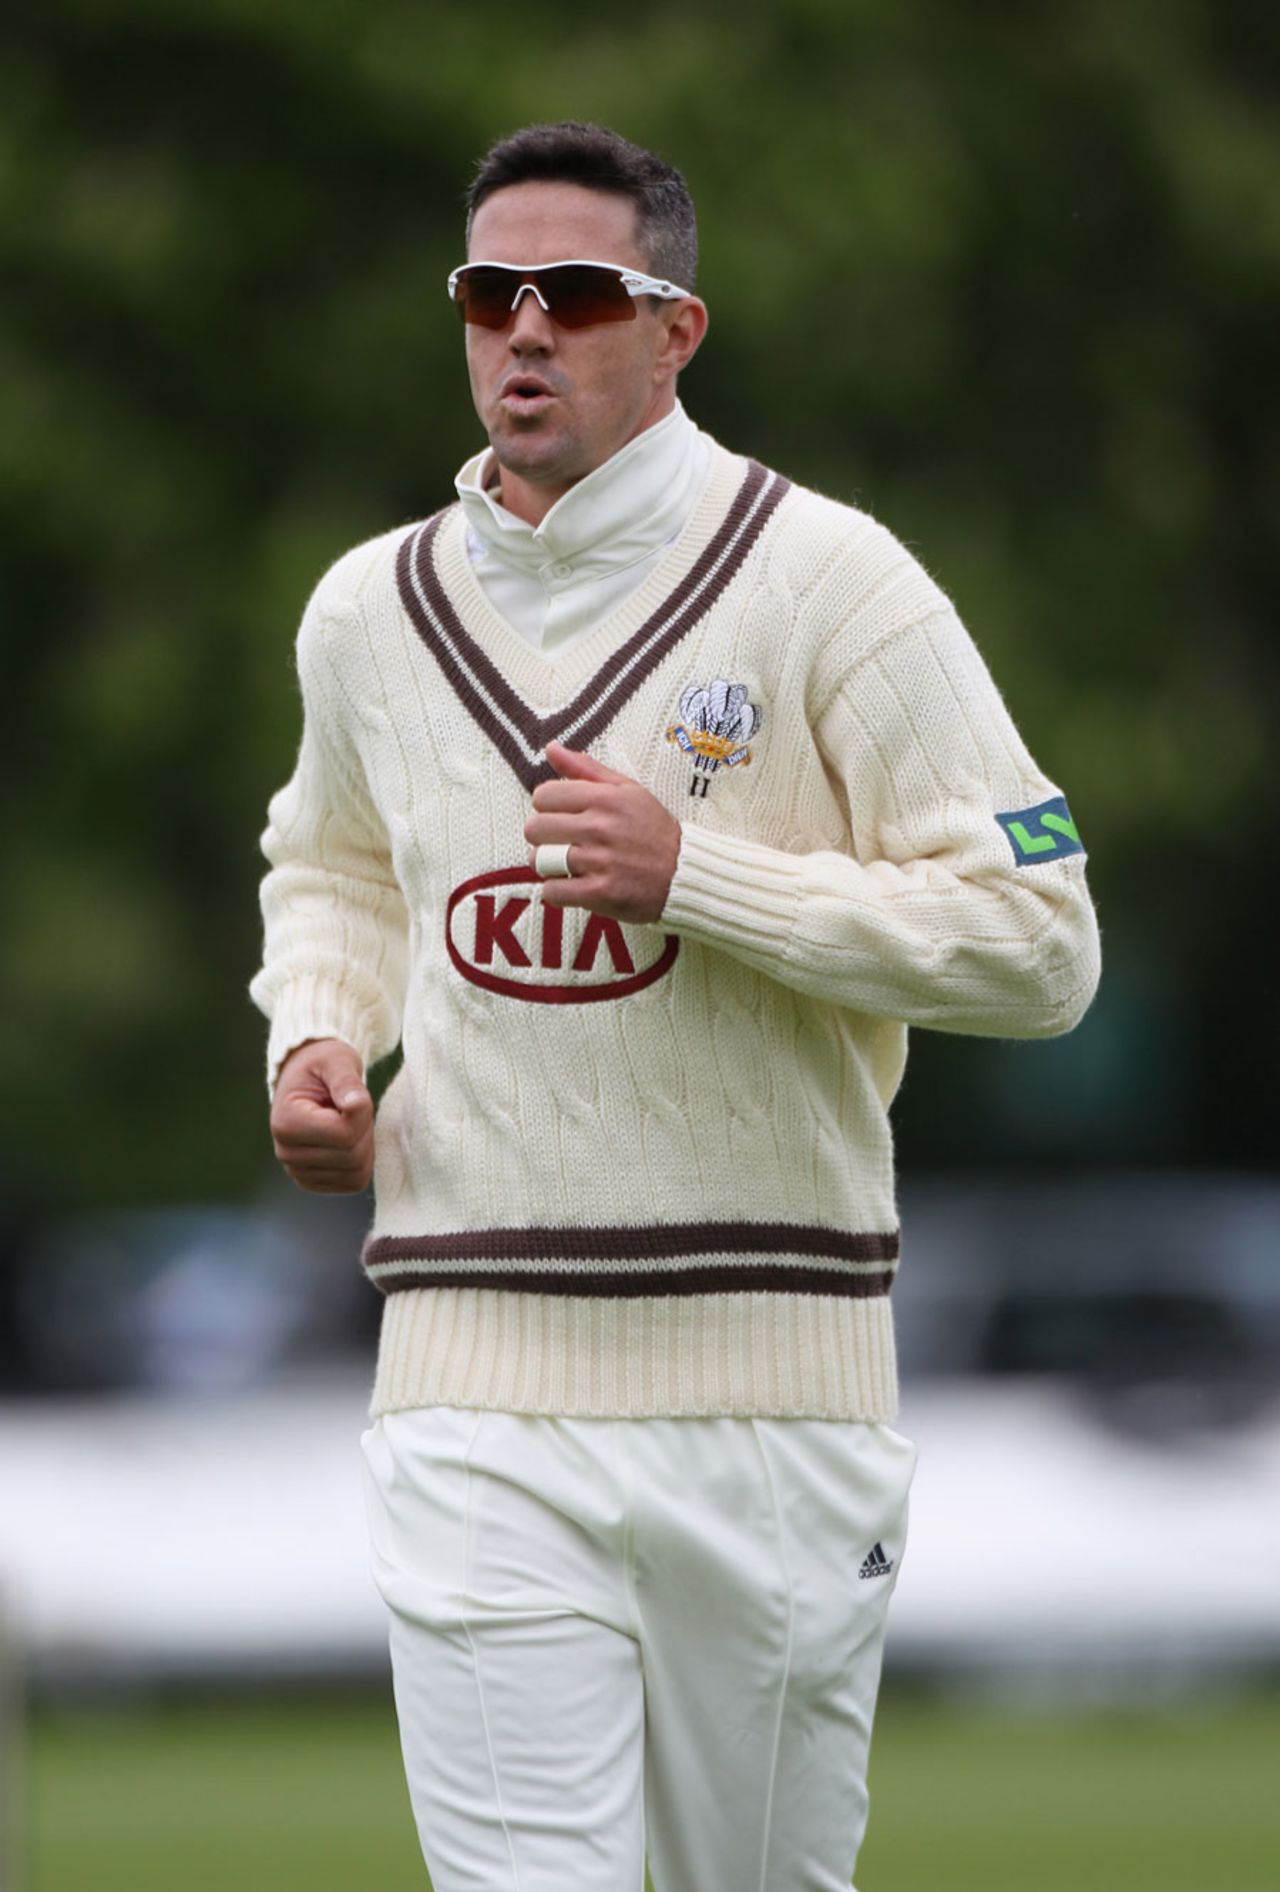 Kevin Pietersen wrapped up warm whilst in the field, Worcestershire v Surrey, County Championship, Division One, 1st day, New Road, May 9, 2012